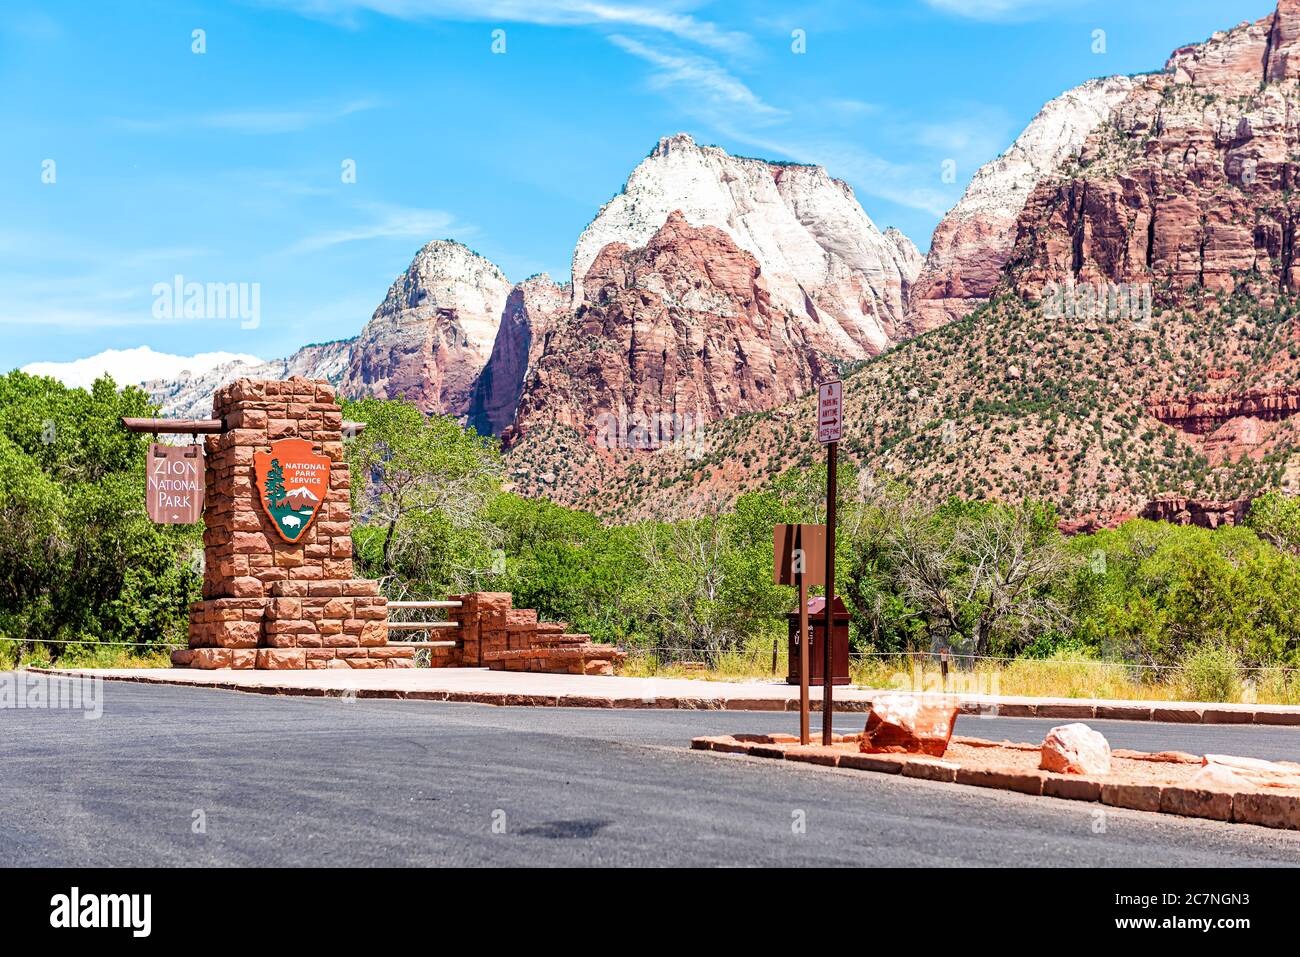 Springdale, USA - August 5, 2019: Zion National Park entrance sign welcome on road in Utah and cliff rock formations Stock Photo